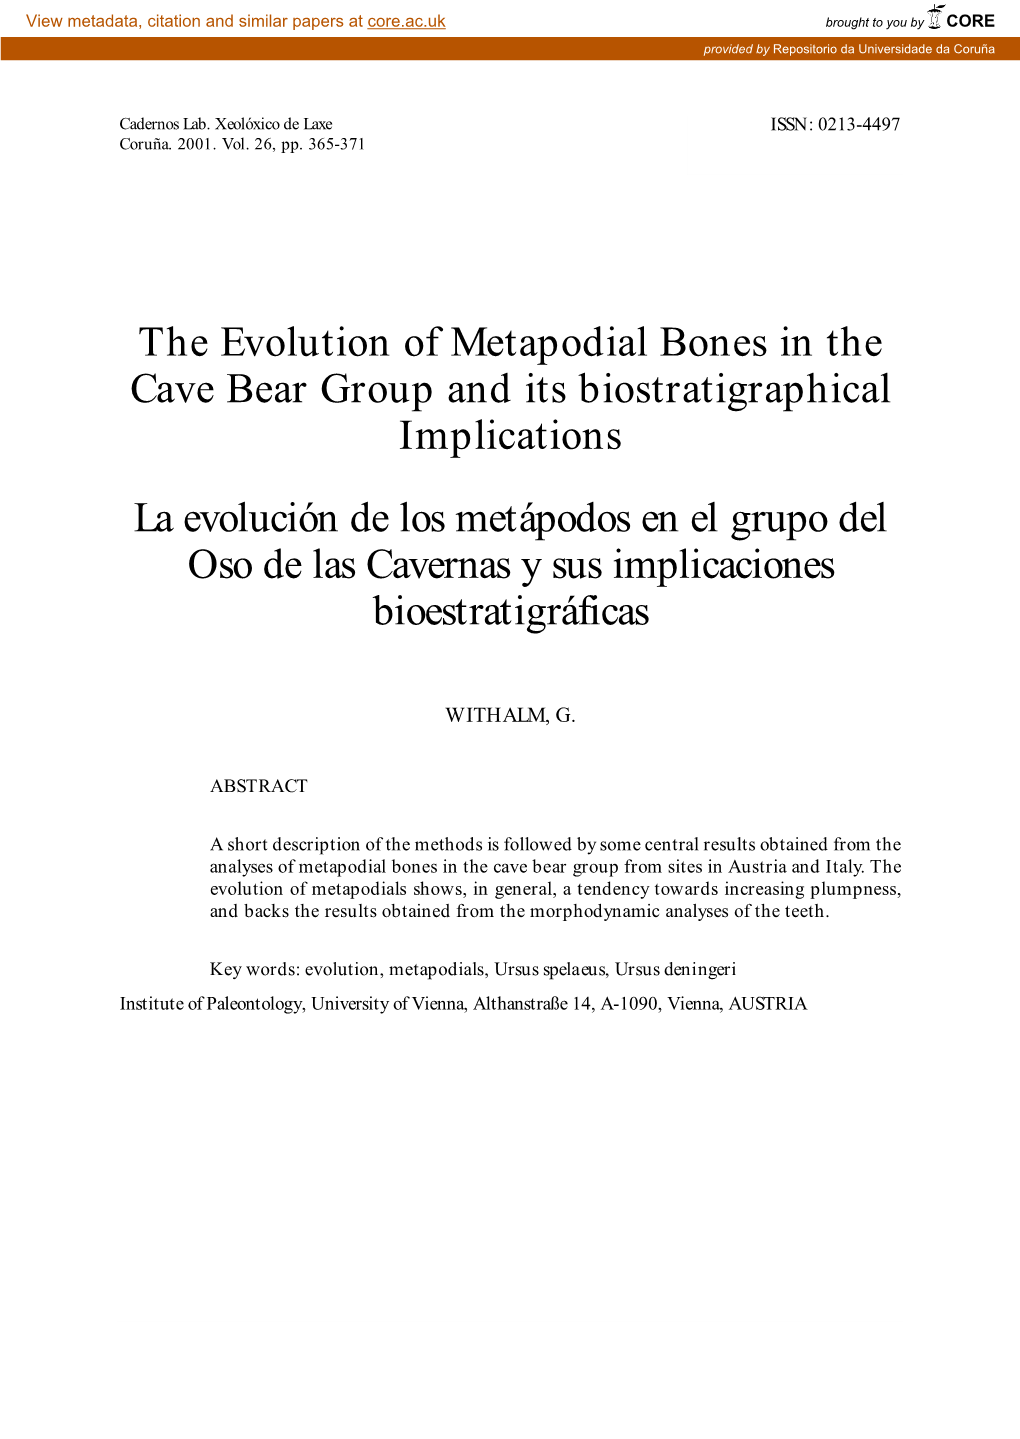 The Evolution of Metapodial Bones in the Cave Bear Group And